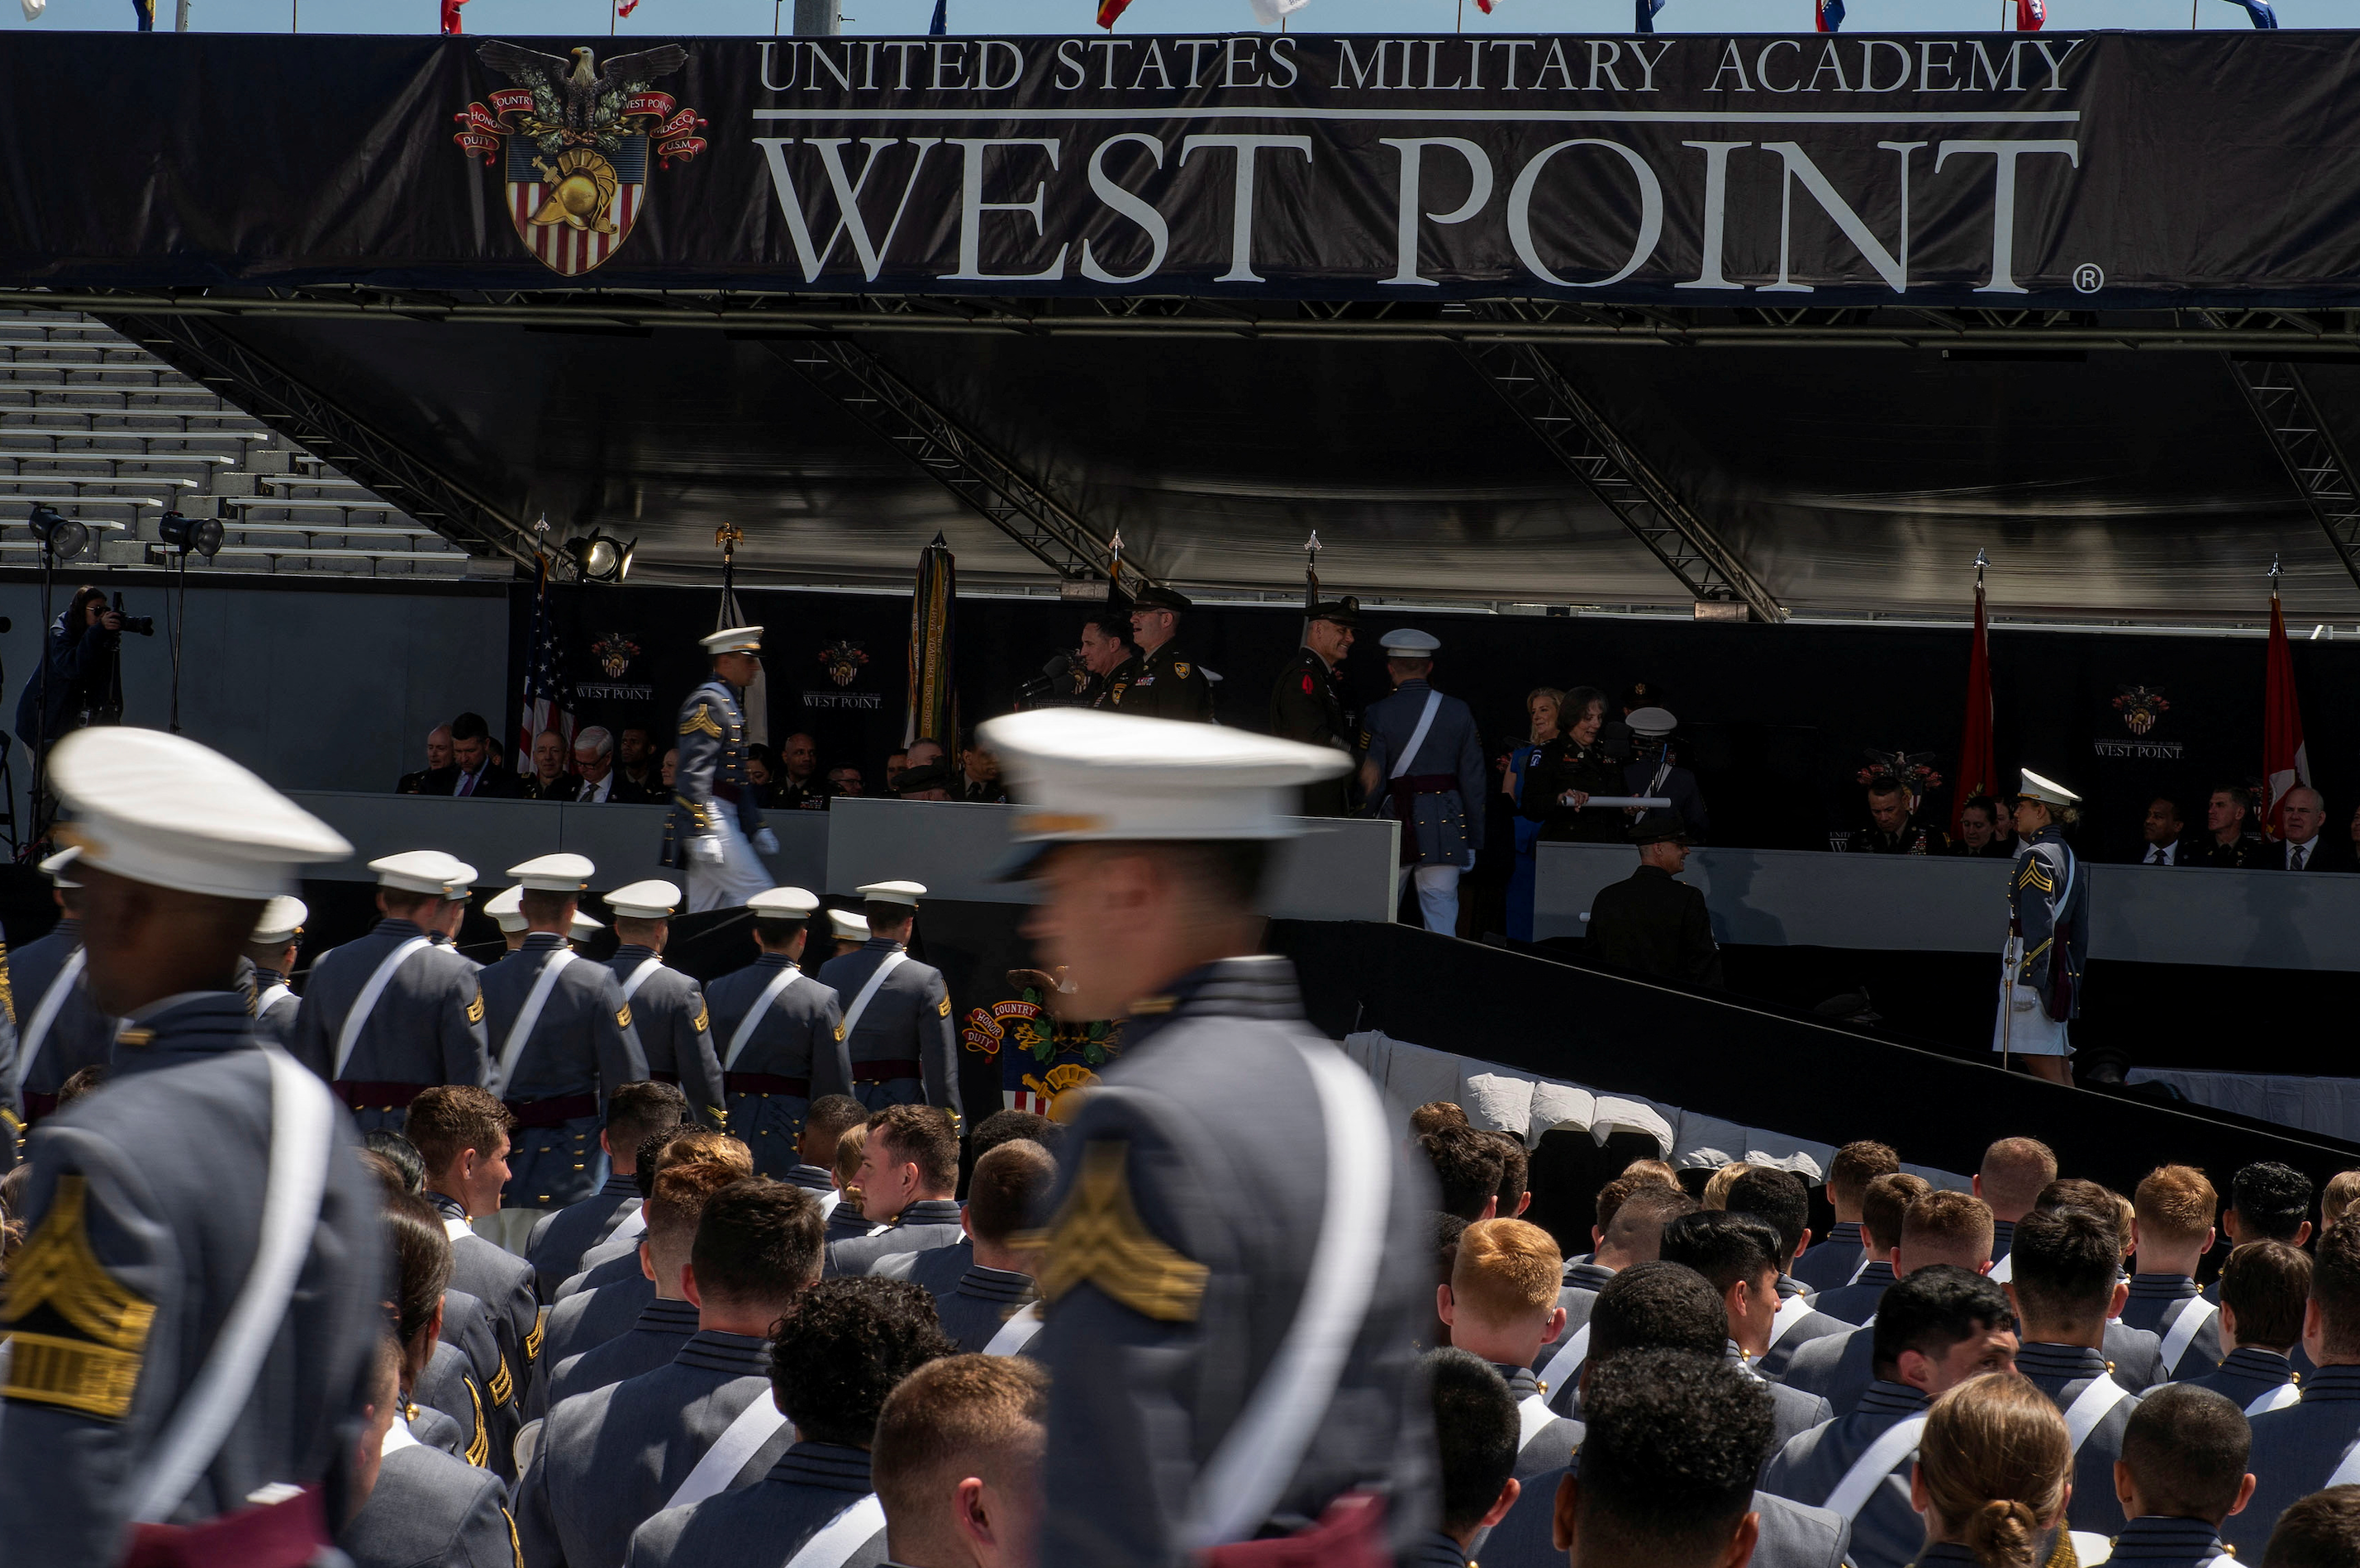 US anti-affirmative action group sues West Point over admissions policy